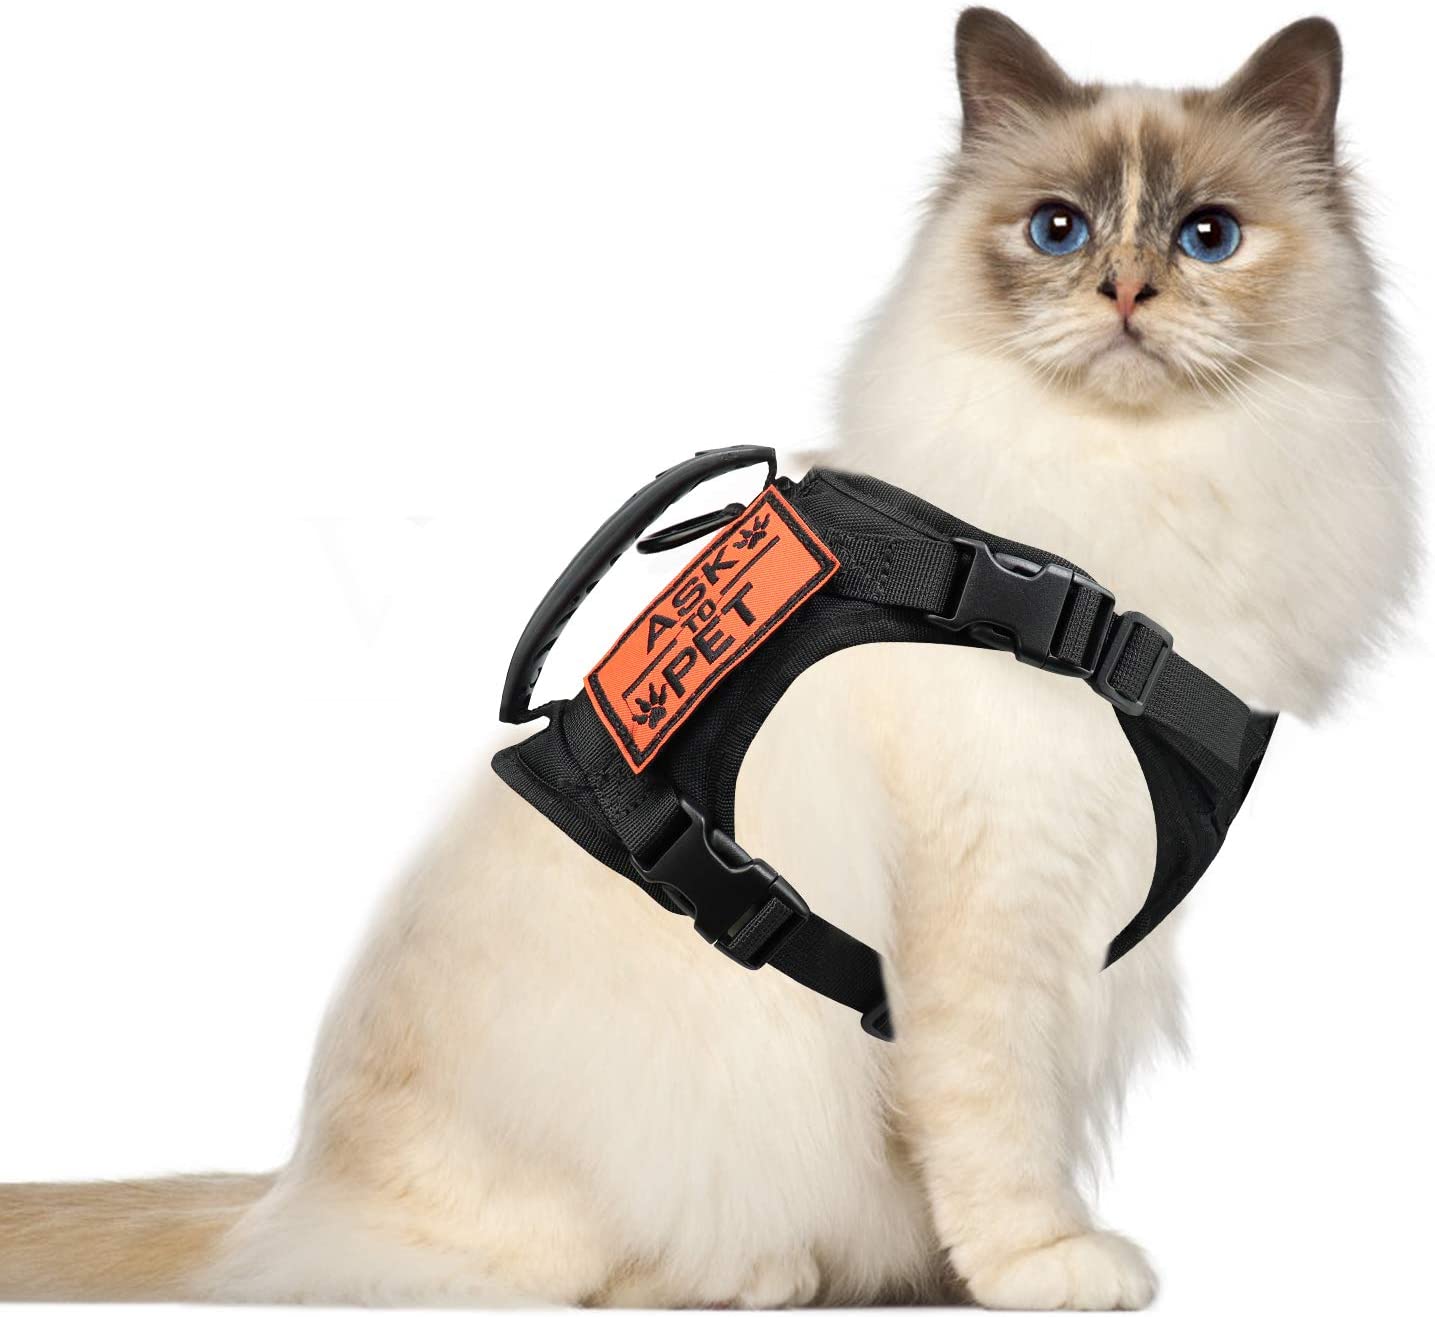 The Best Cat Harness Reviews and Buyer's Guide